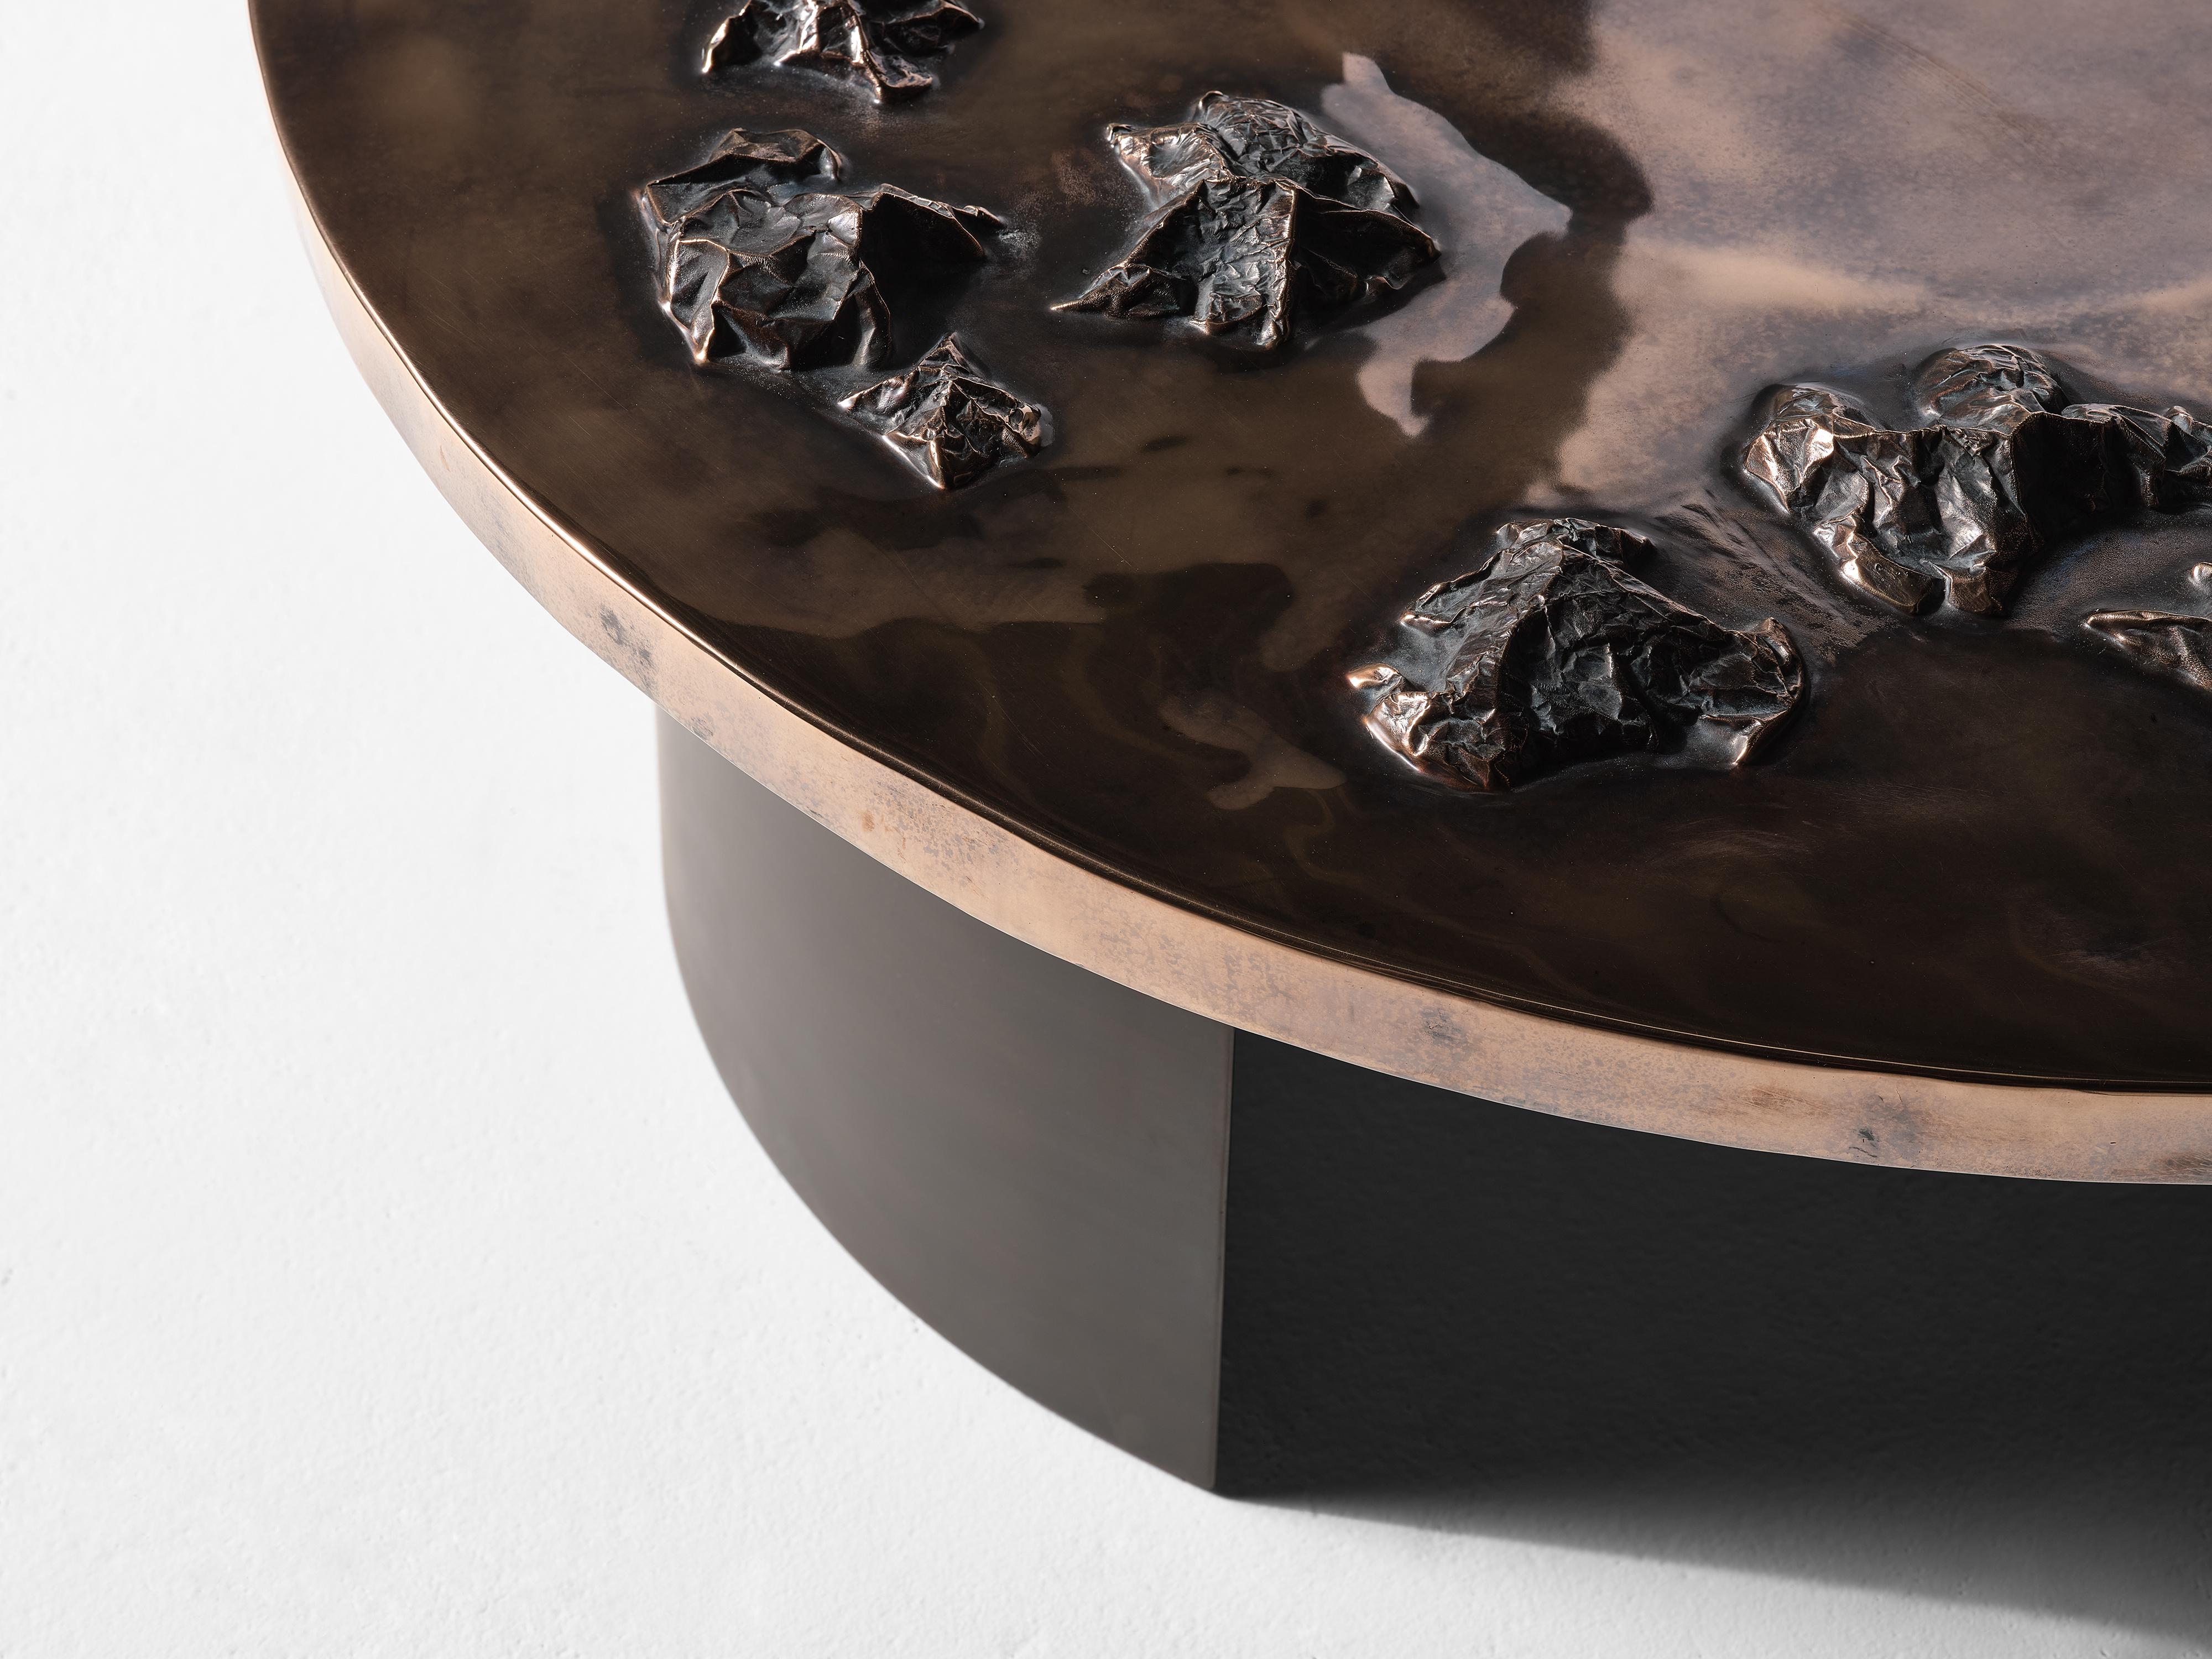 Master metalsmith Douglas Fanning's extra elegant coffee table features an extended series of topographical crests spanning abutting a third of its smooth top. Fanning, always eager to explore new territories in form and material, has in this case